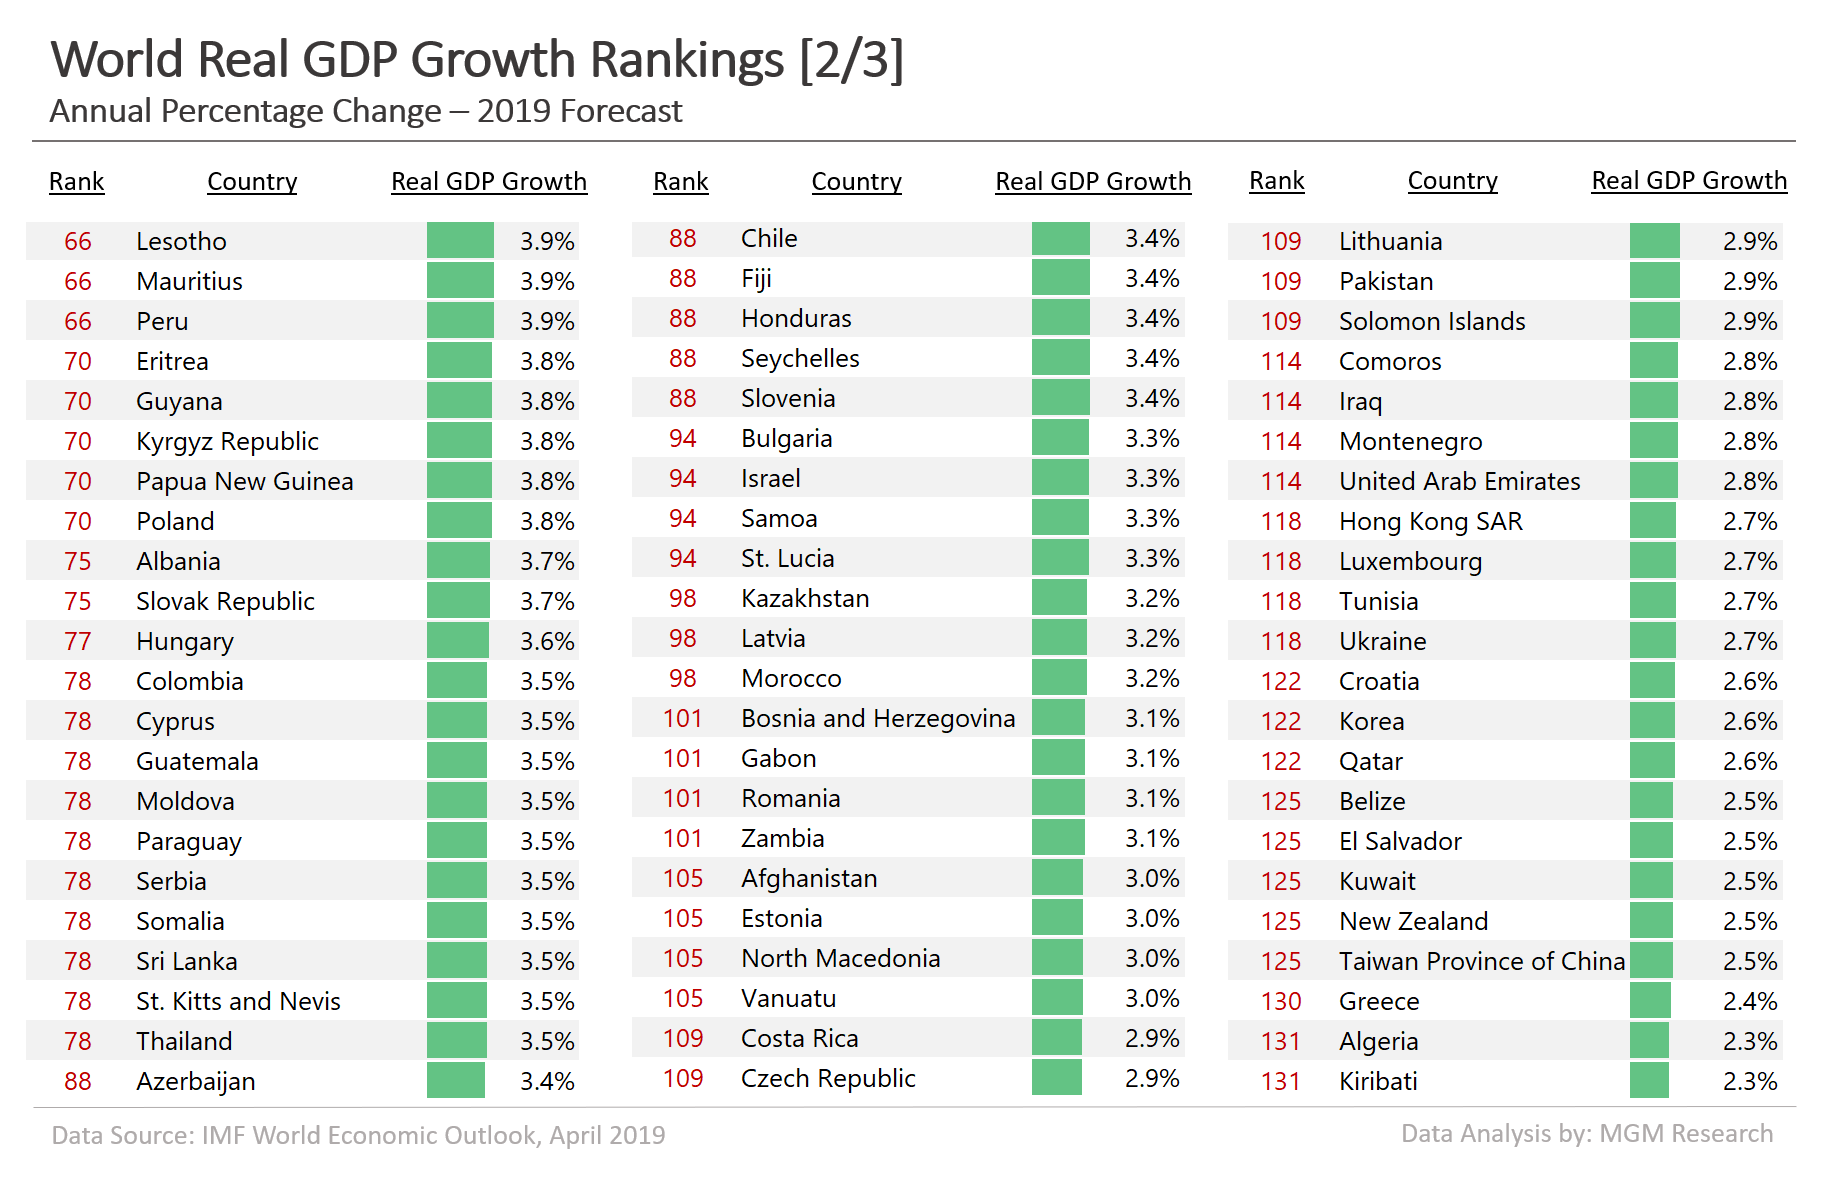 World real GDP growth rankings 2019 - 2 of 3